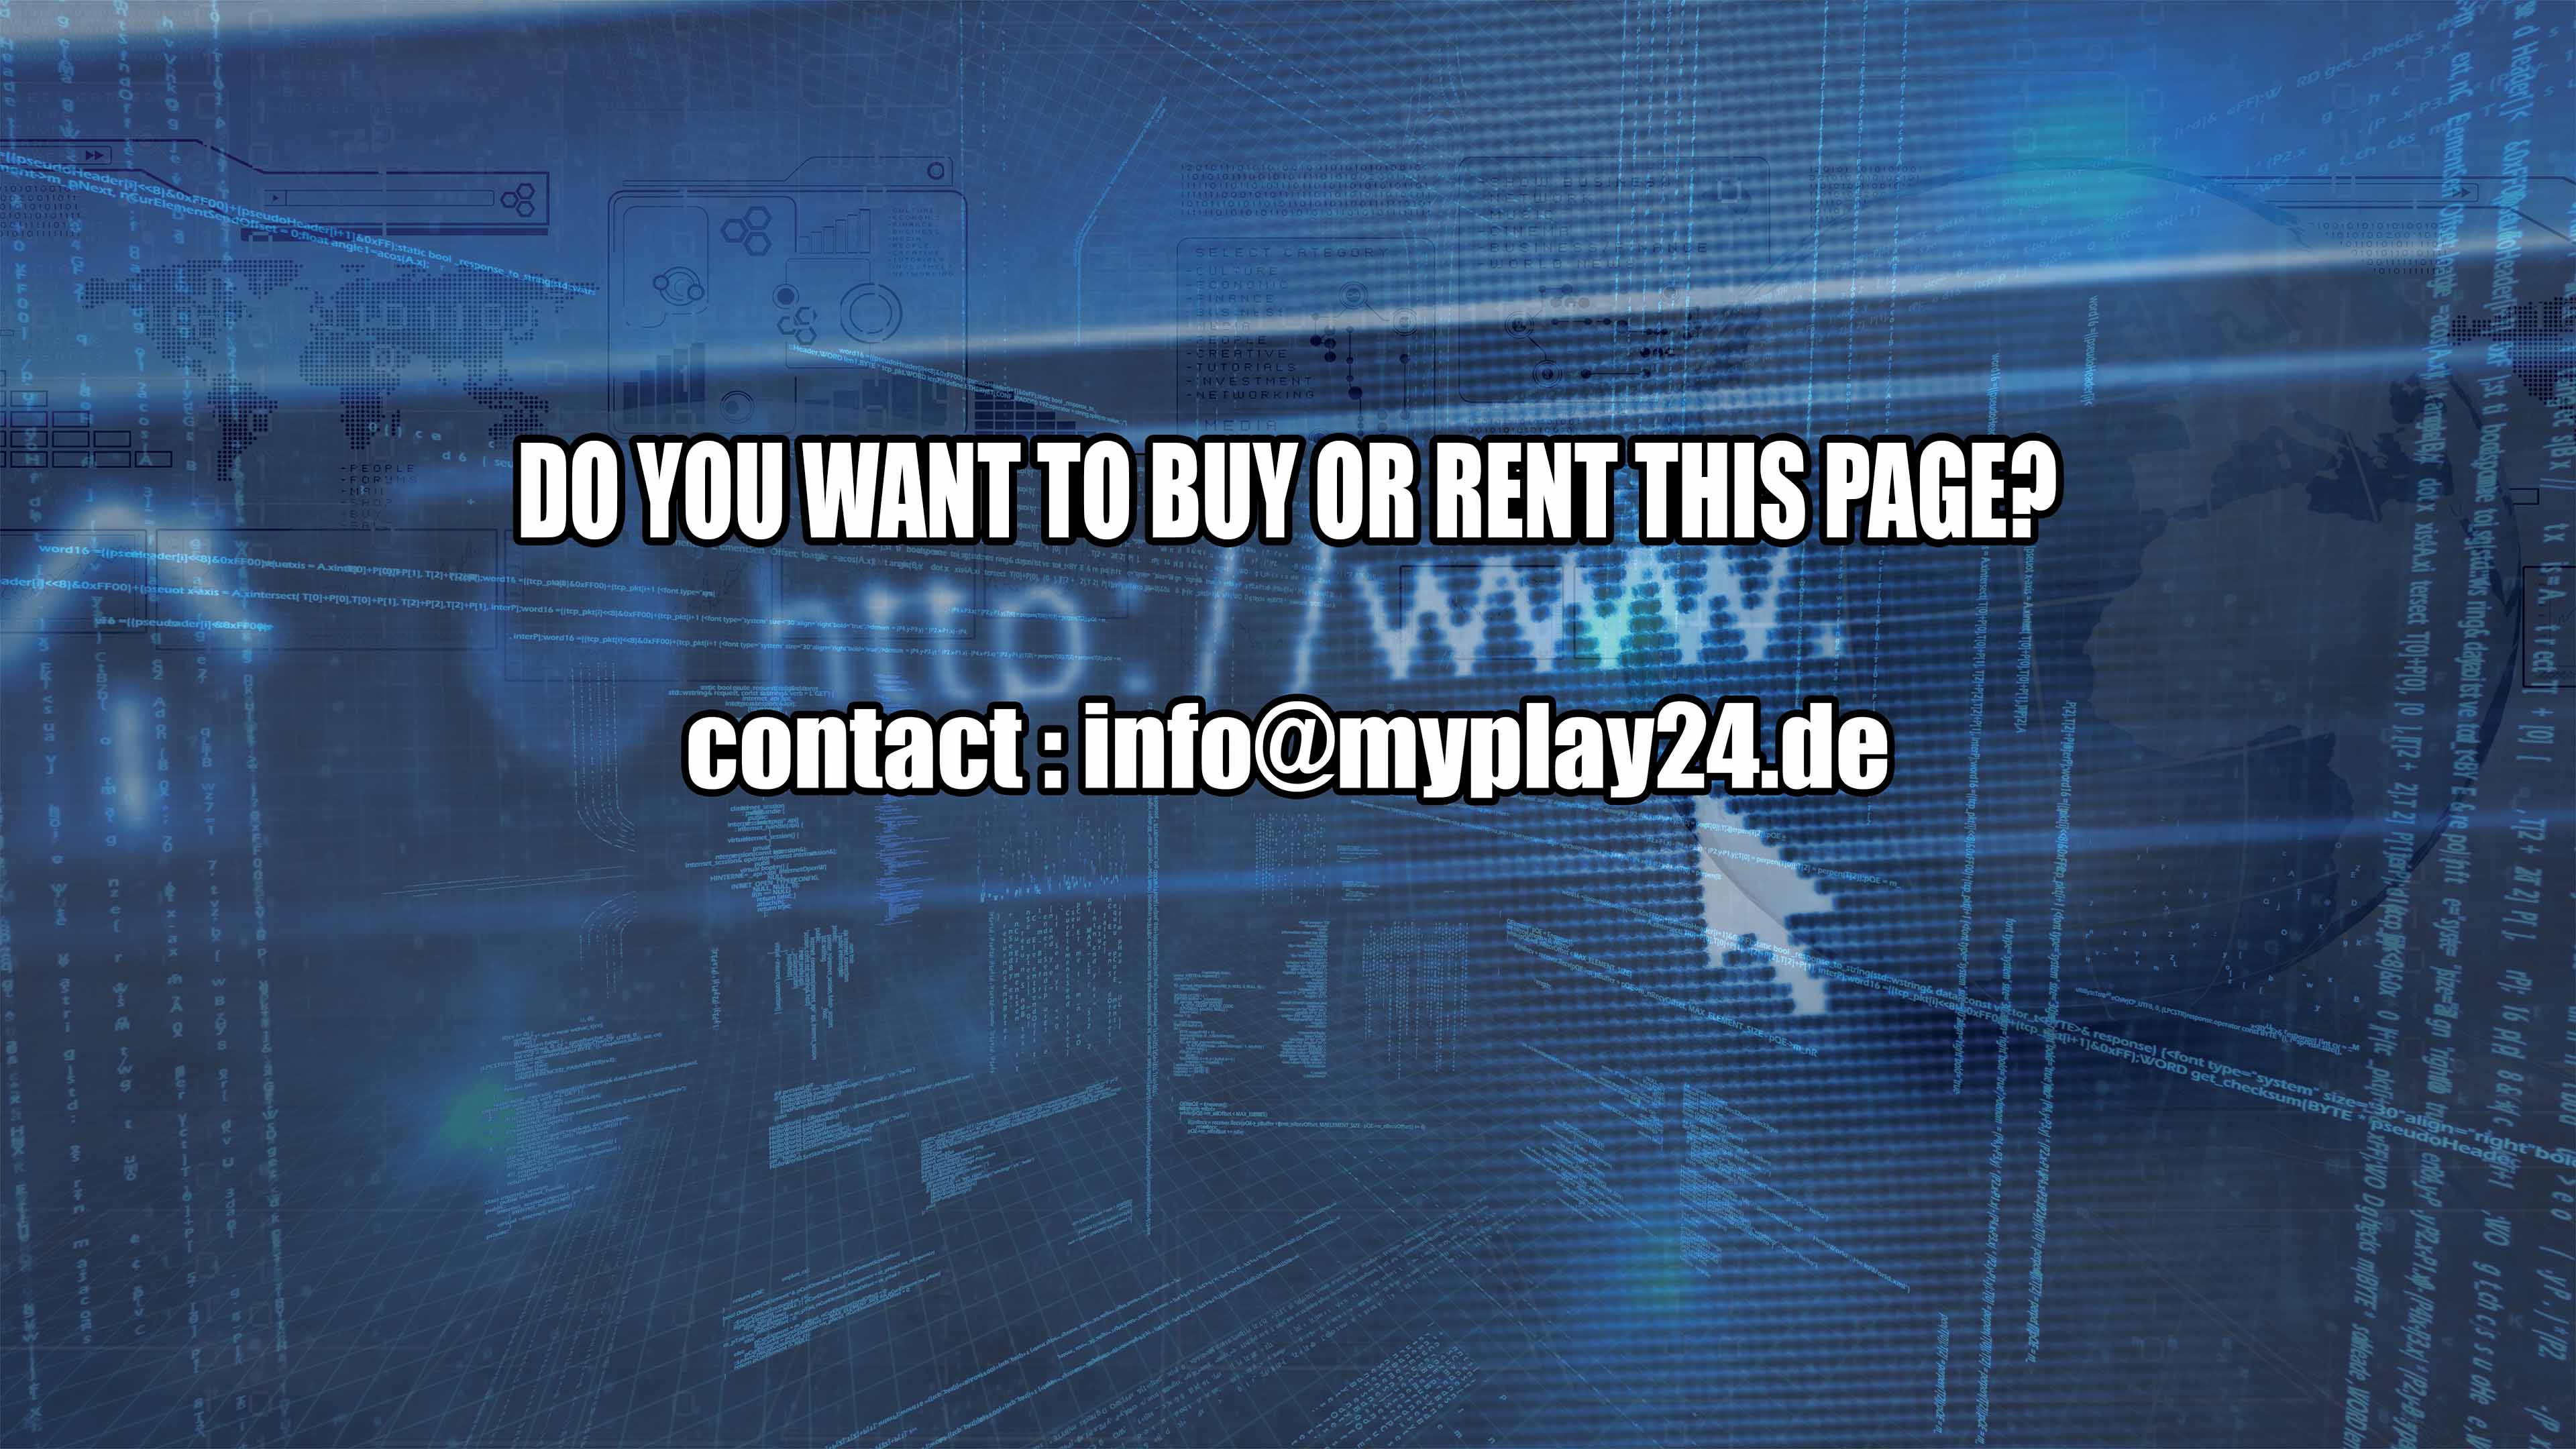 Do you want to buy or rent this page?